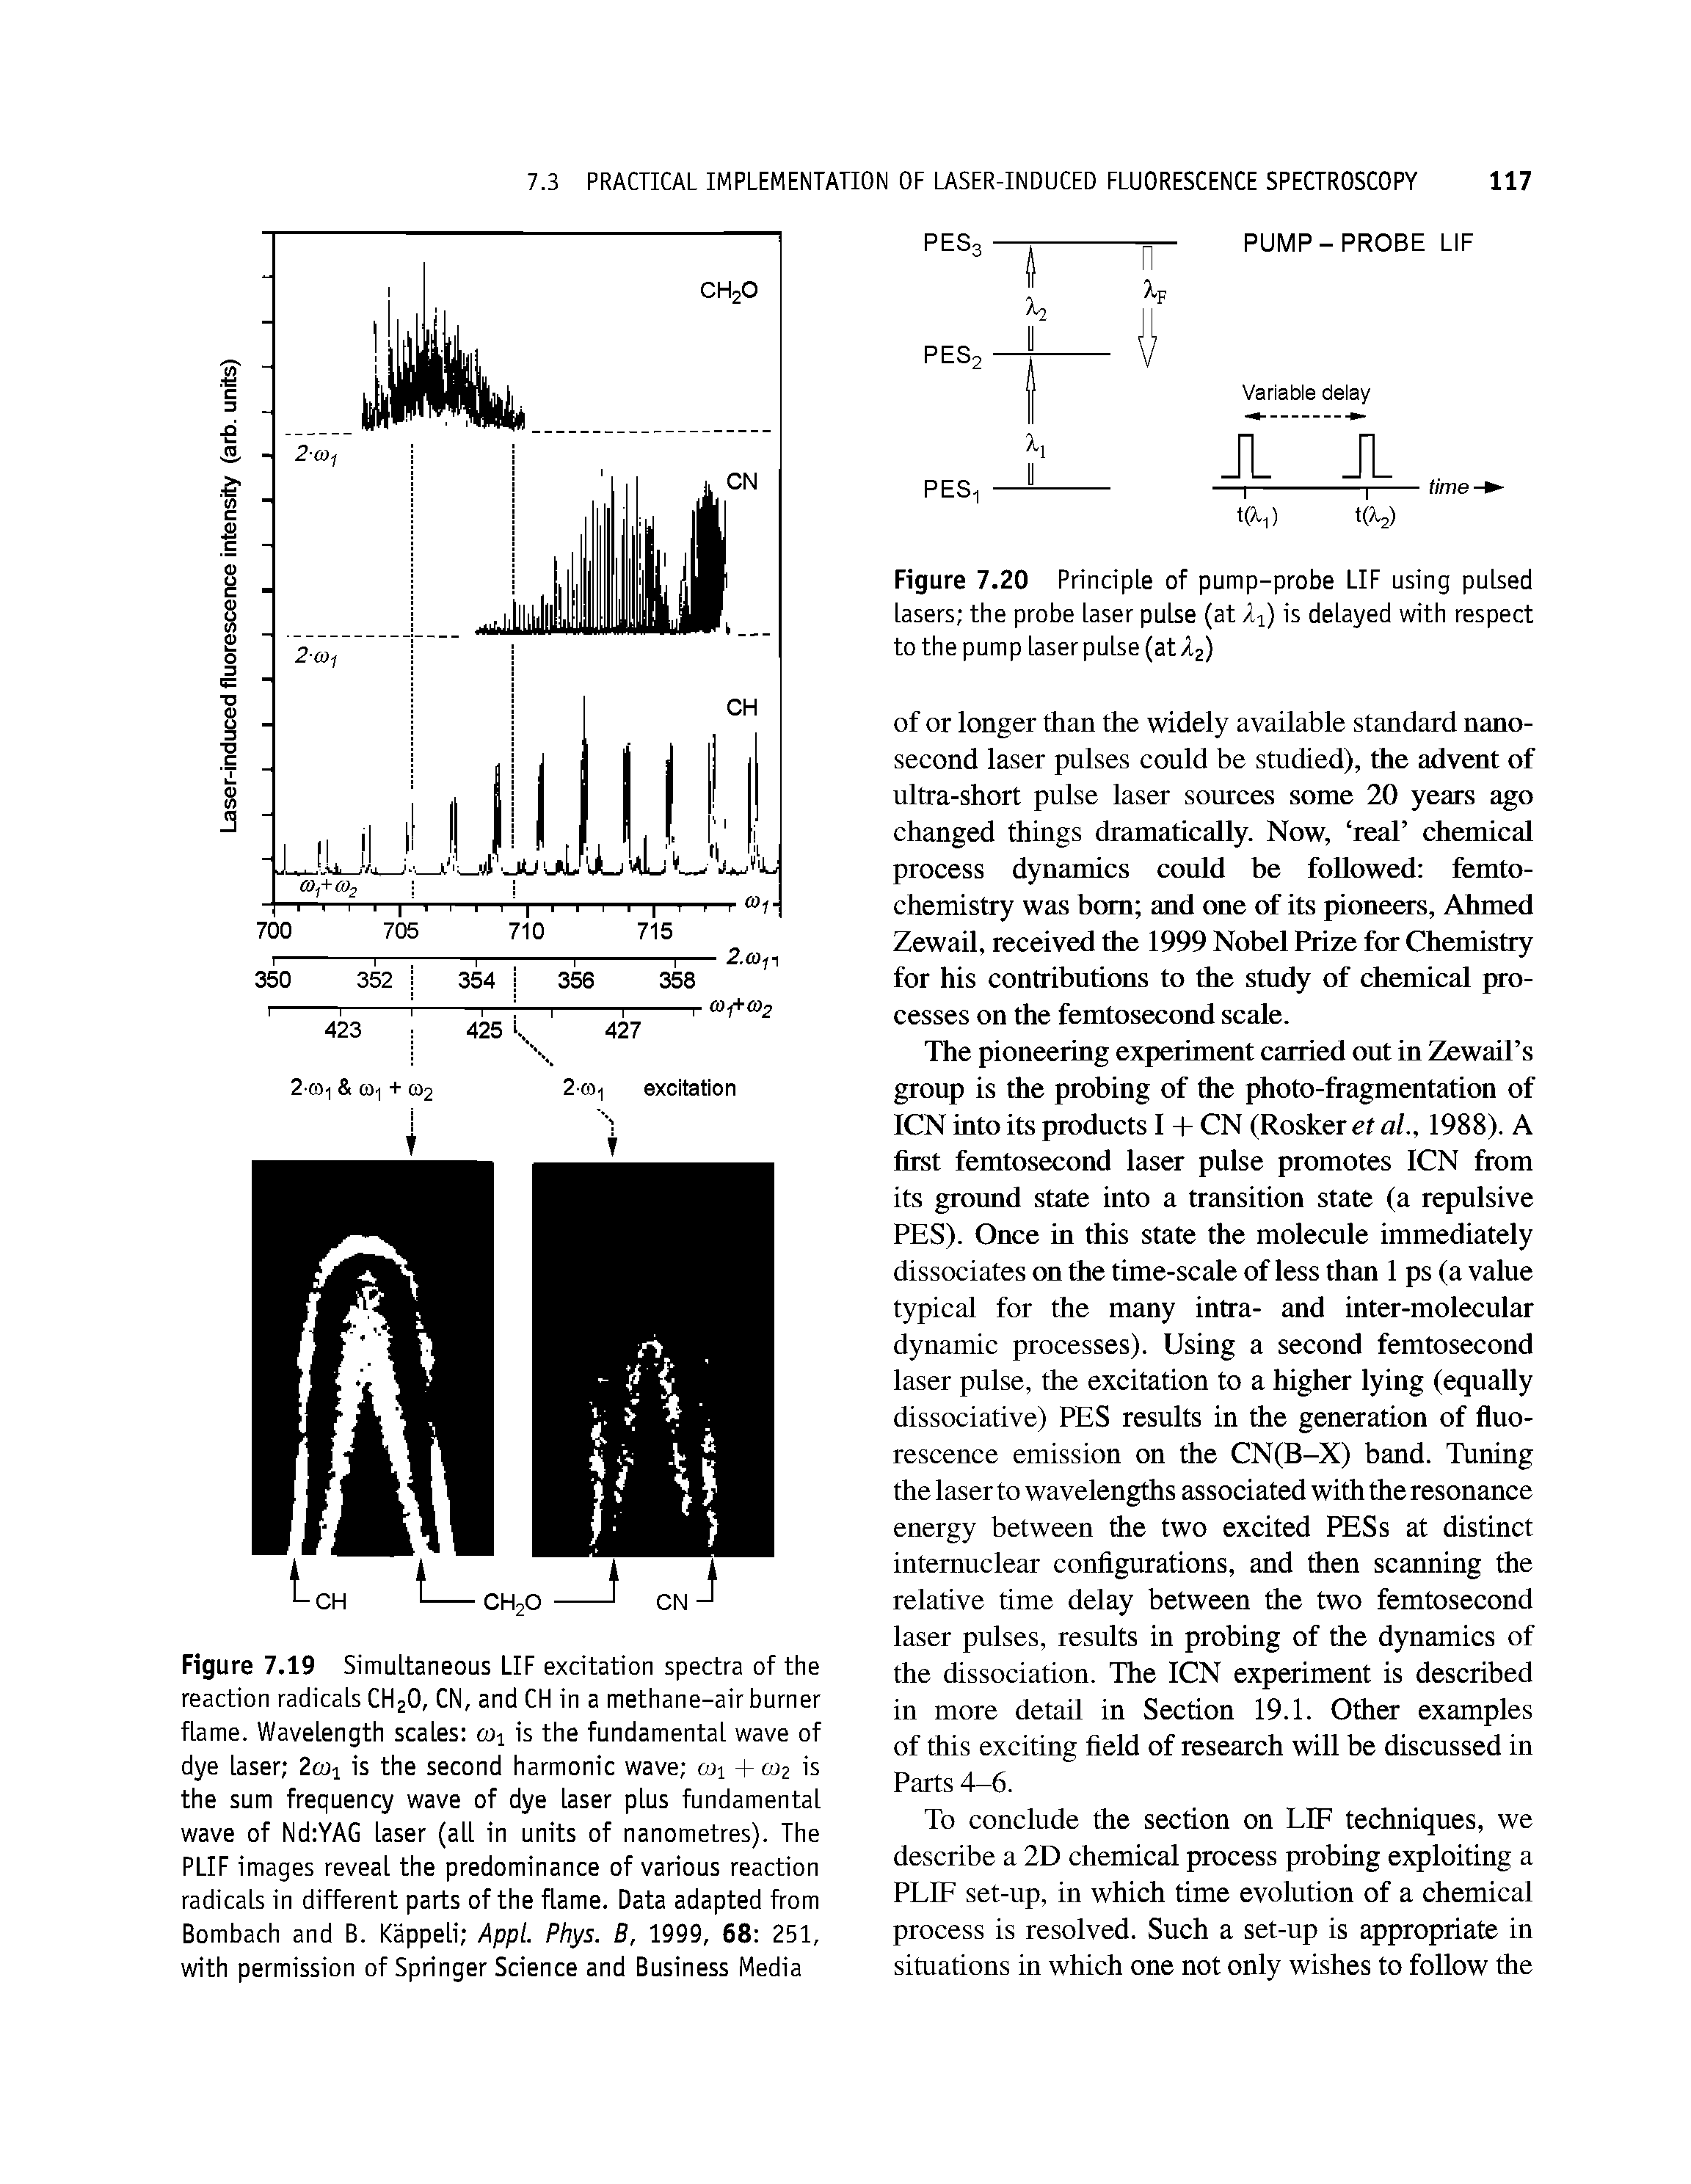 Figure 7.19 Simultaneous LIF excitation spectra of the reaction radicals CHjO, CN, and CFI in a methane-air burner flame. Wavelength scales coi is the fundamental wave of dye laser 2coi is the second harmonic wave coi + W2 is the sum frequency wave of dye laser plus fundamental wave of Nd YAG laser (all in units of nanometres). The PLIF images reveal the predominance of various reaction radicals in different parts of the flame. Data adapted from Bombach and B. Kappeli AppL Phys. B, 1999, 68 251, with permission of Springer Science and Business Media...